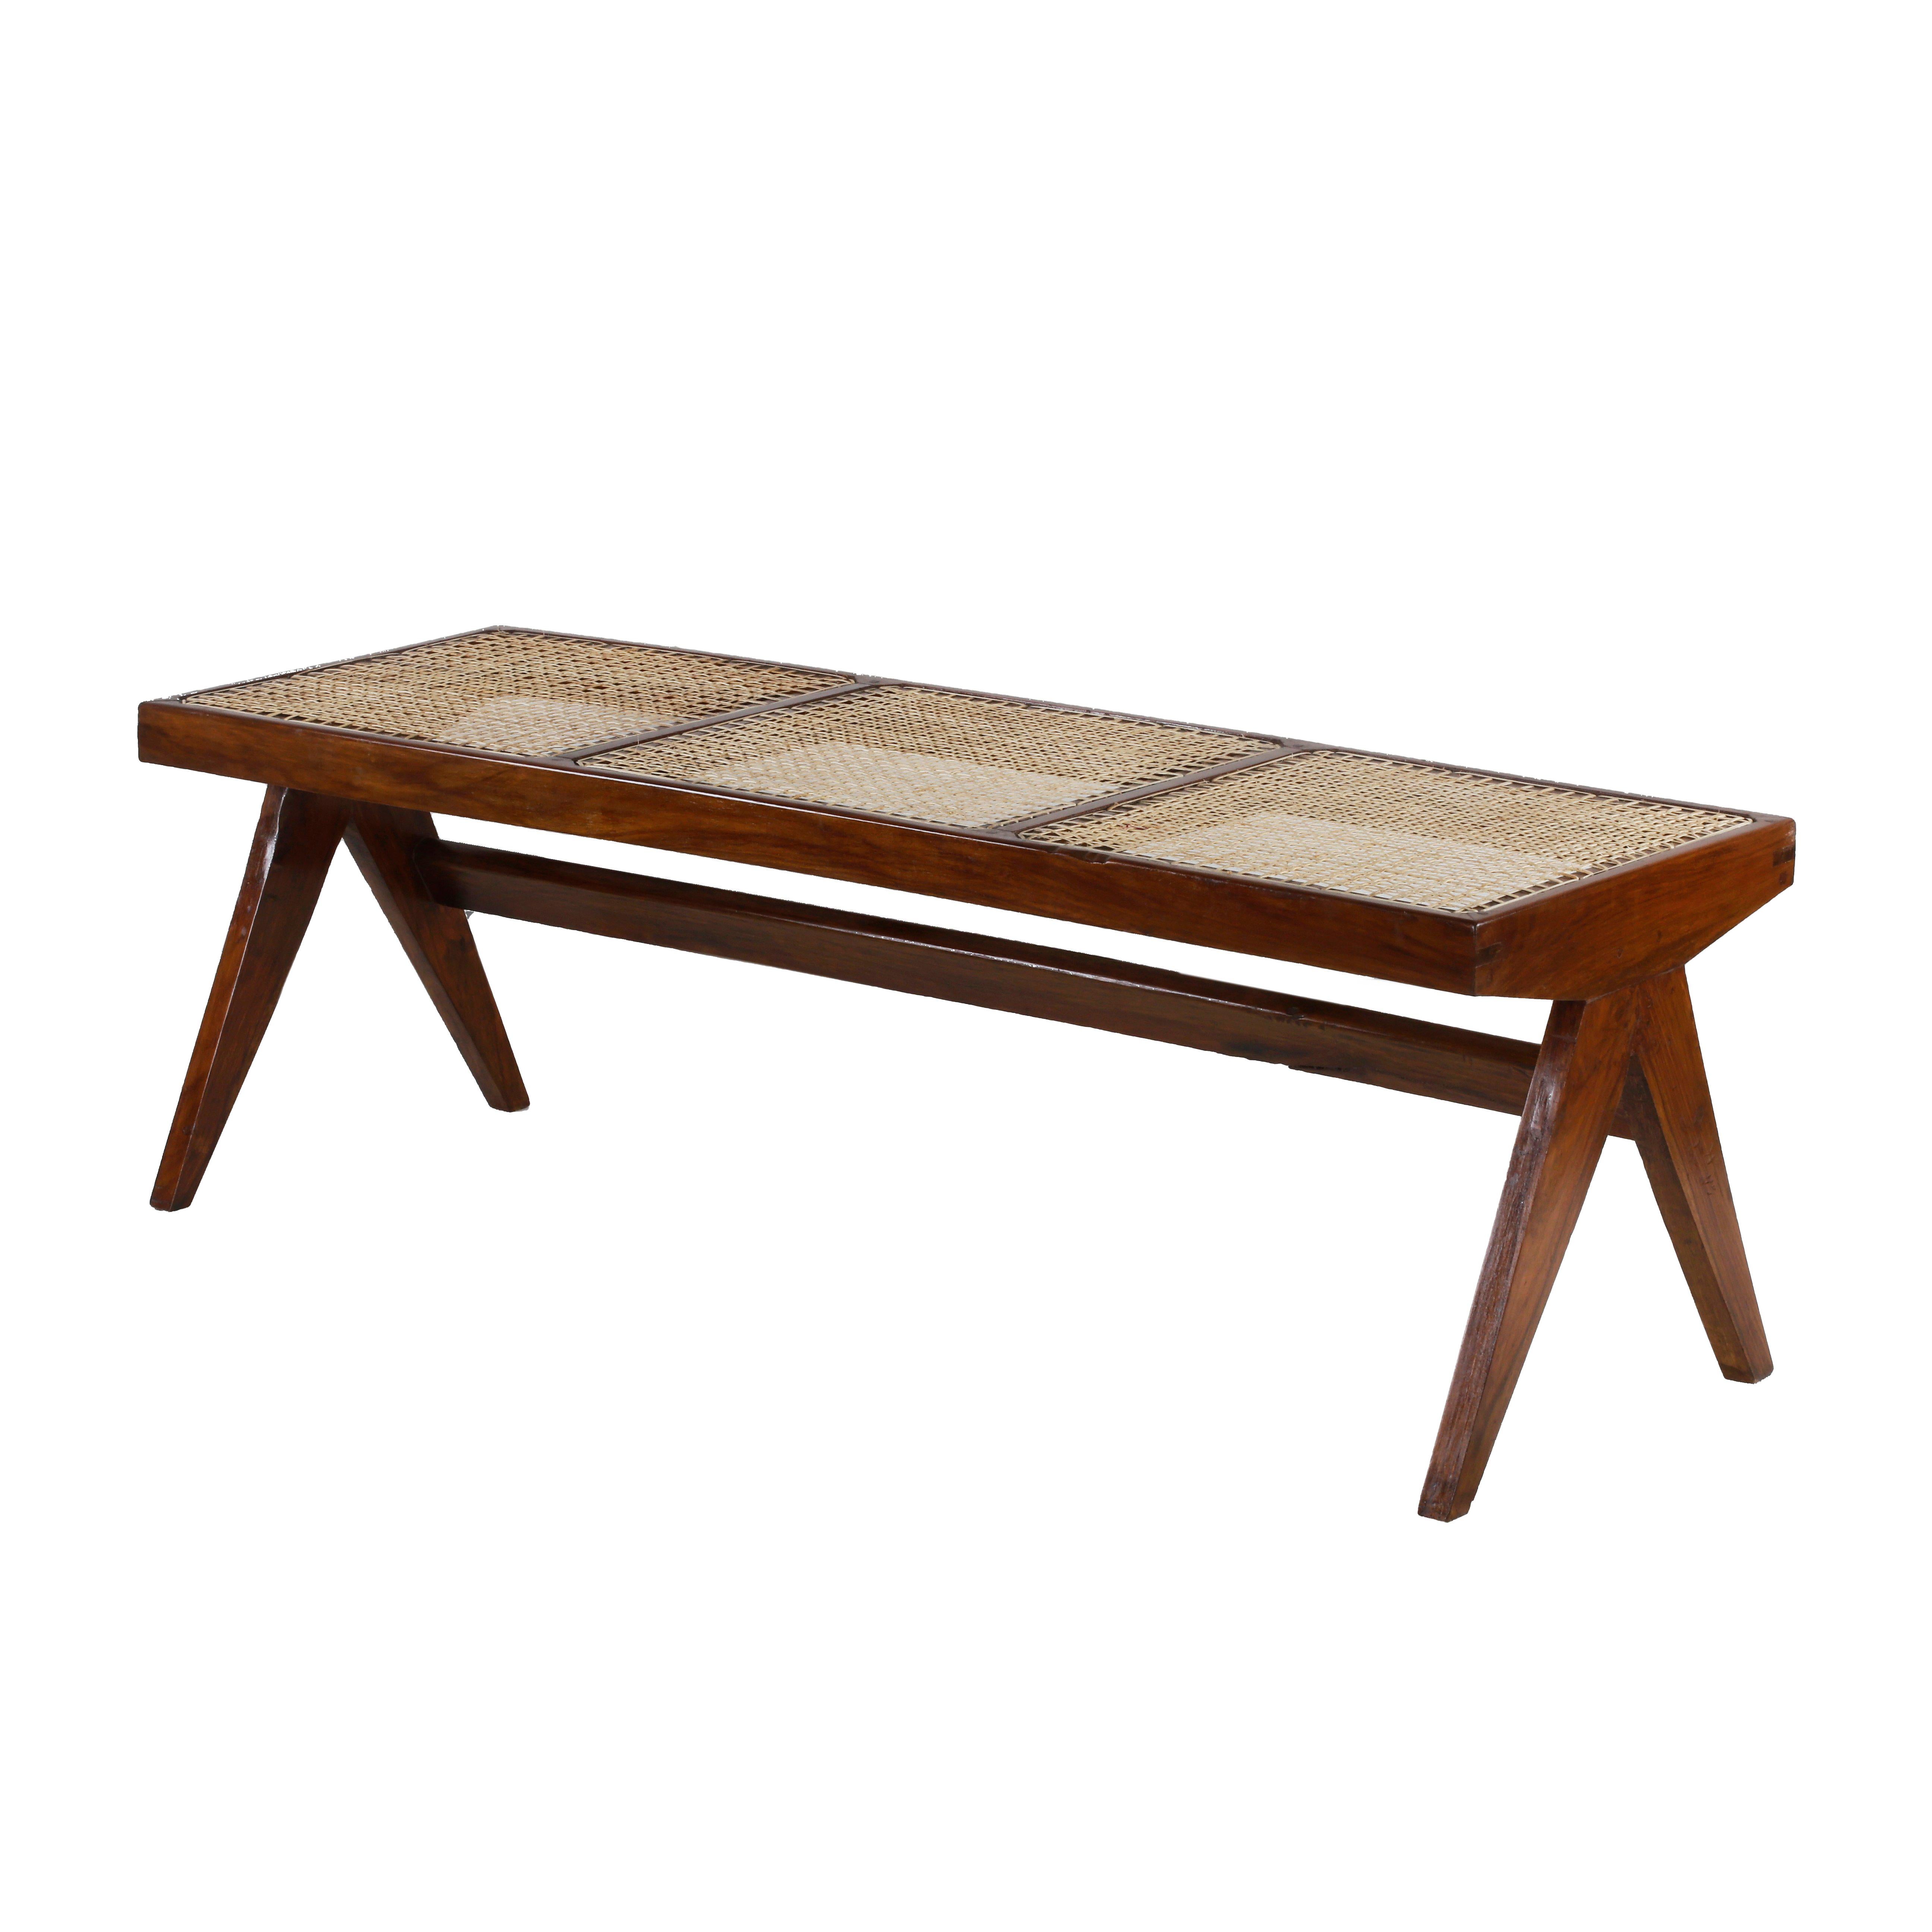 Pierre Jeanneret, Rare Chandigarh Caned Bench, PJ-SI-33-C